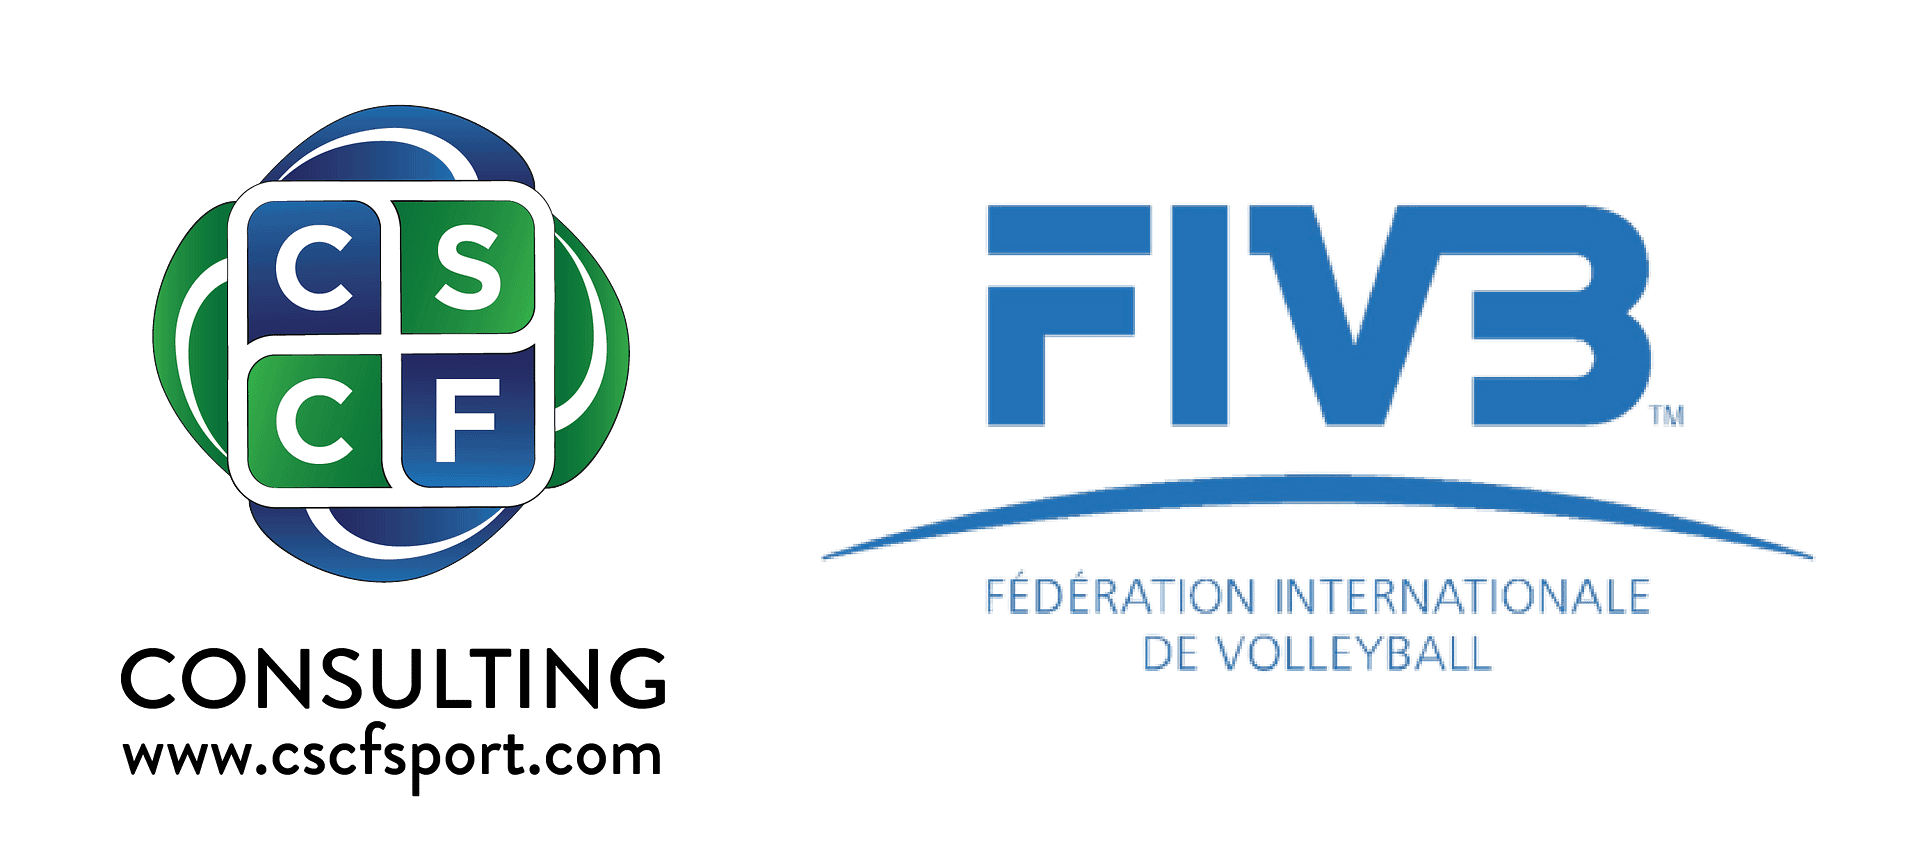 CSCFconsulting+FIVB-01